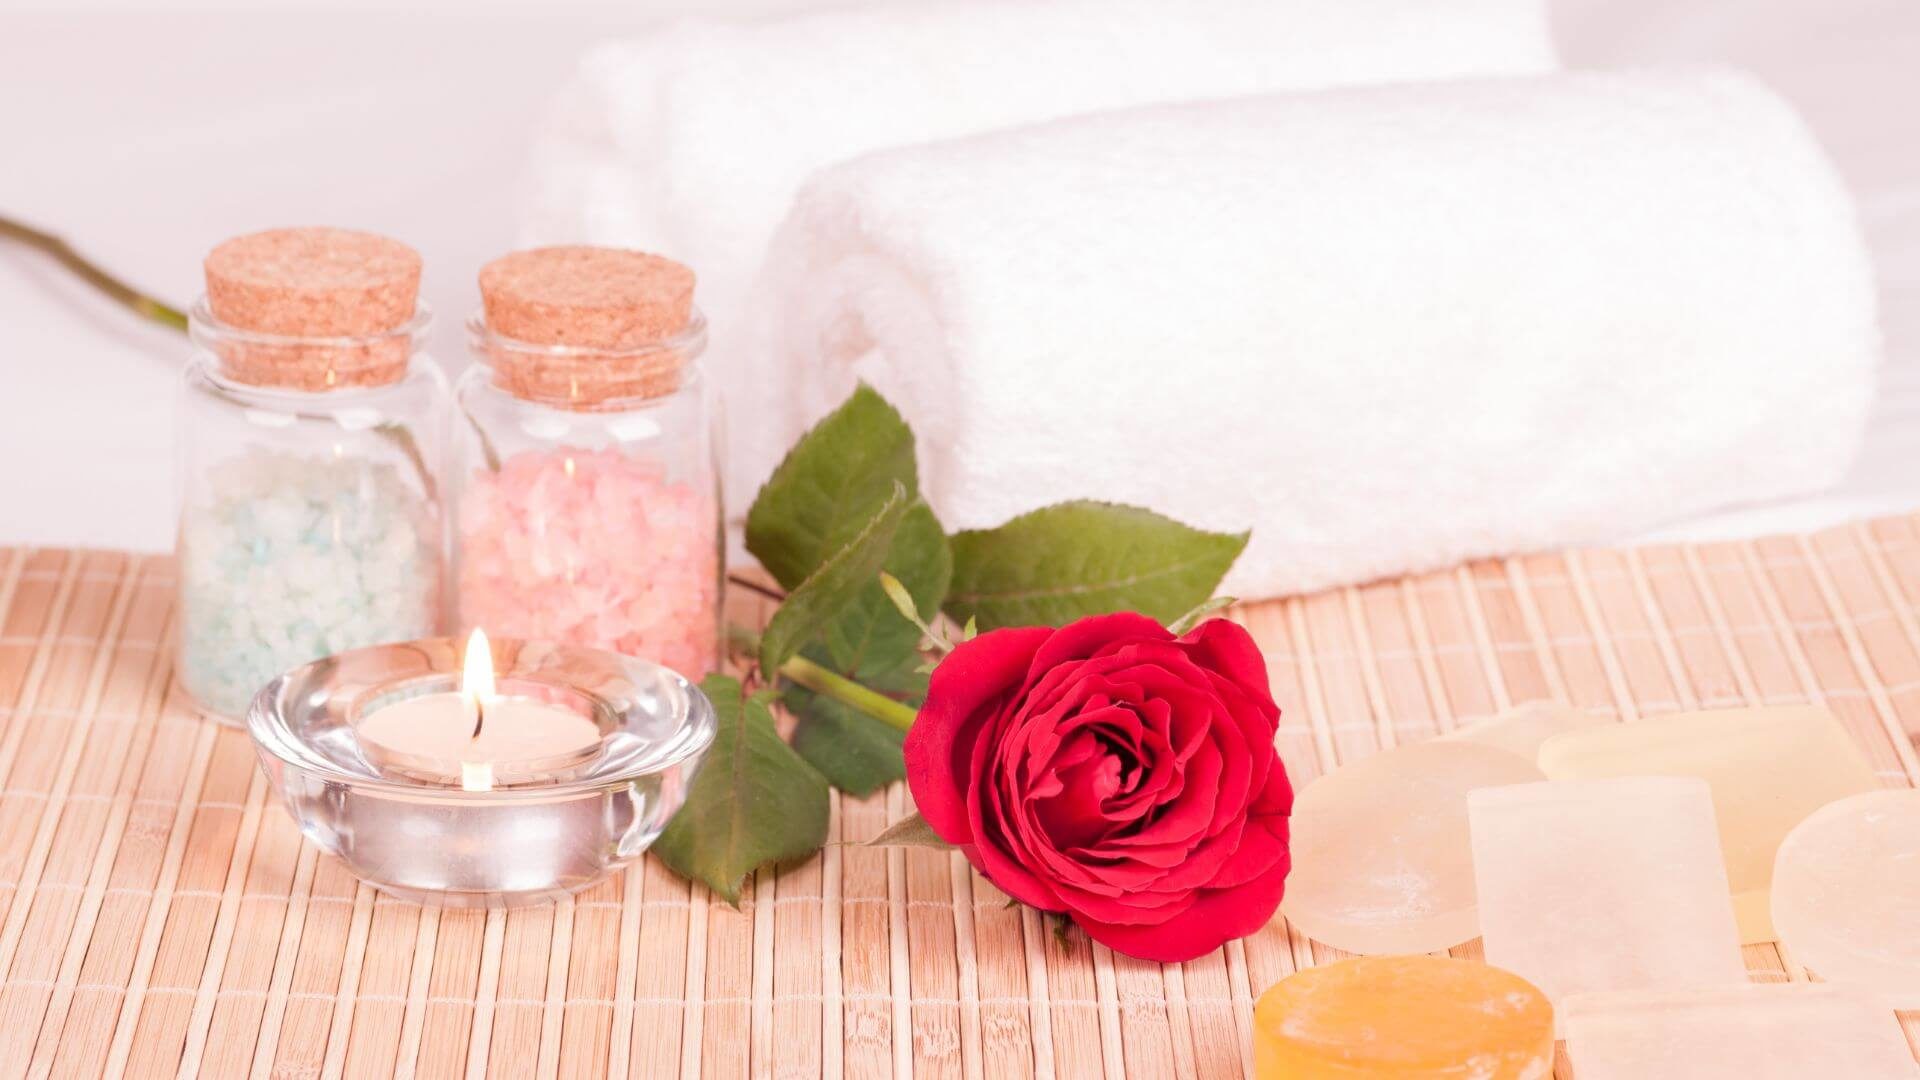 Spa table holding glass jars with bath salts, lit candle, rolled town and red rose.